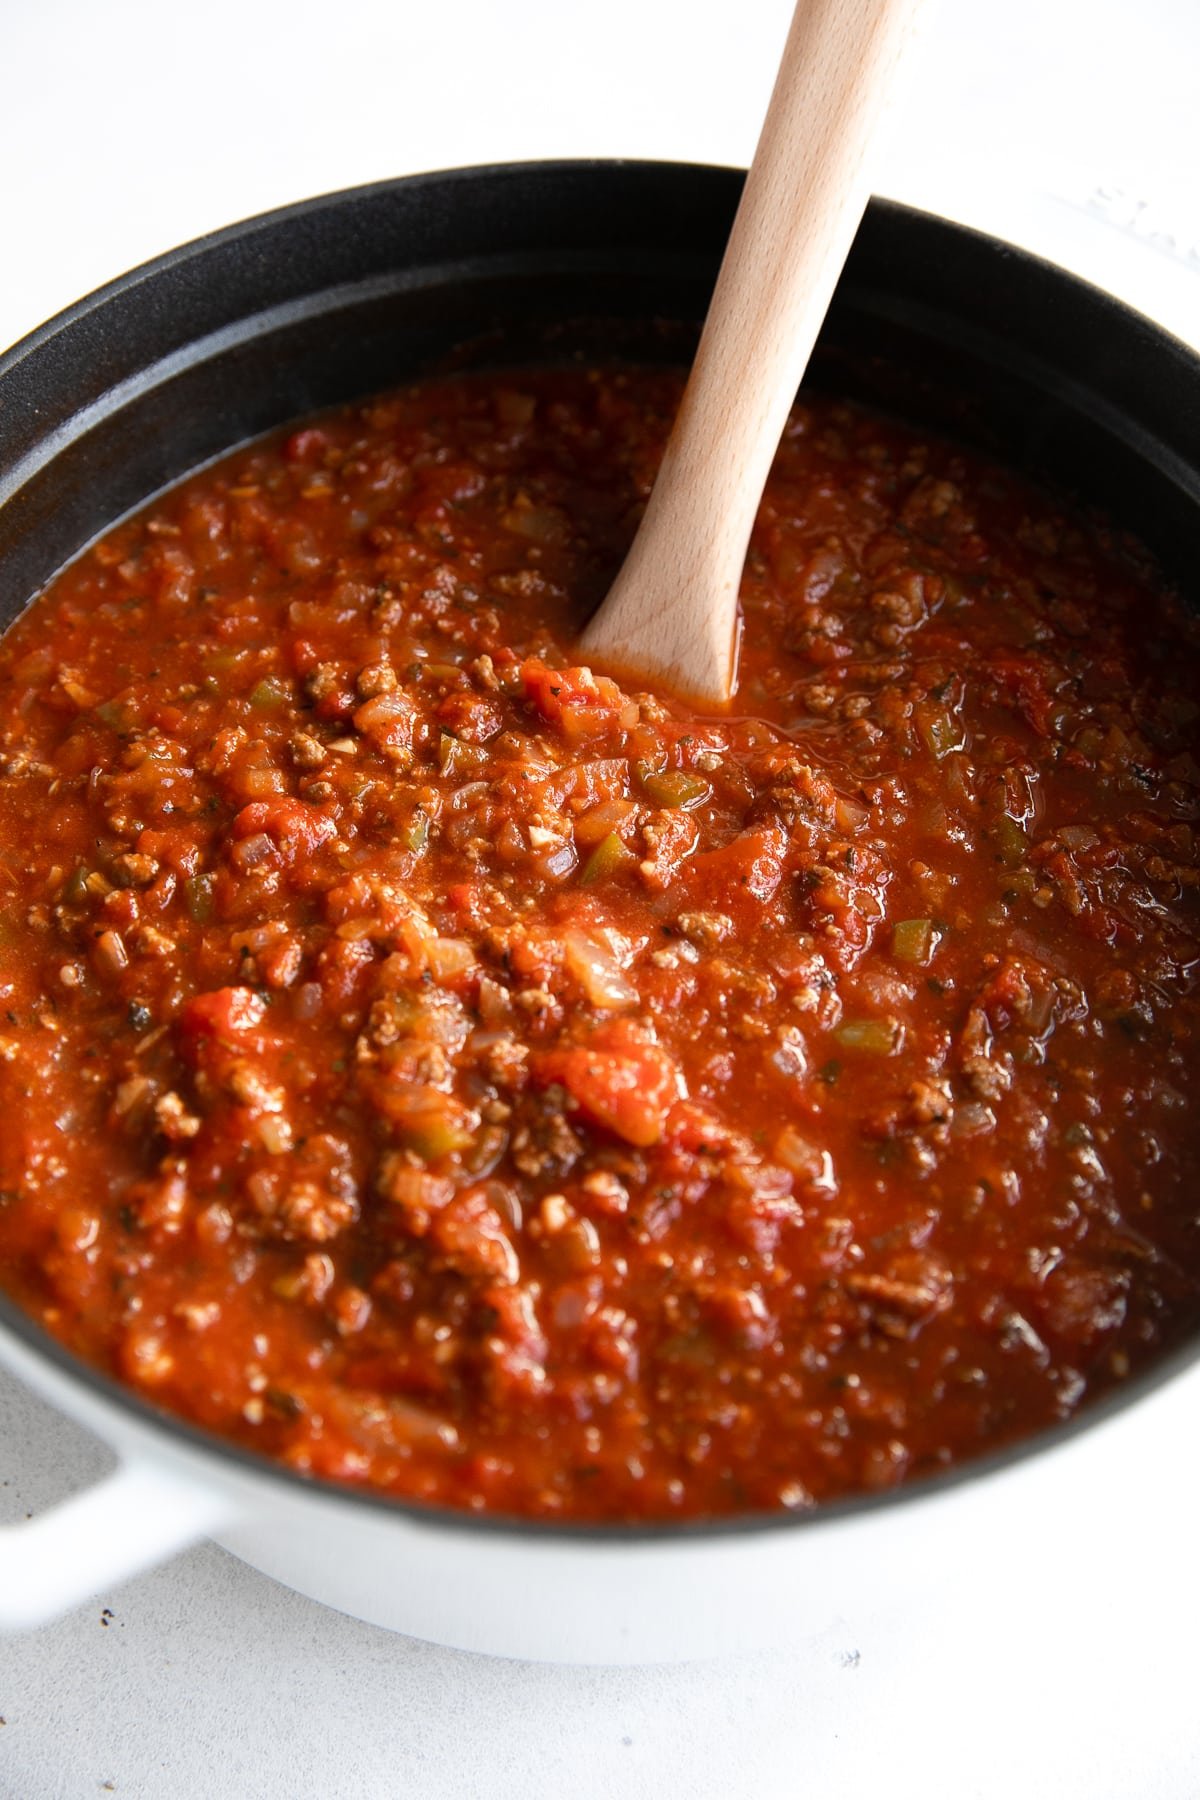 Large heavy-bottom pot filled with the best spaghetti sauce made with onion, garlic, tomato paste, tomatoes, and ground beef.